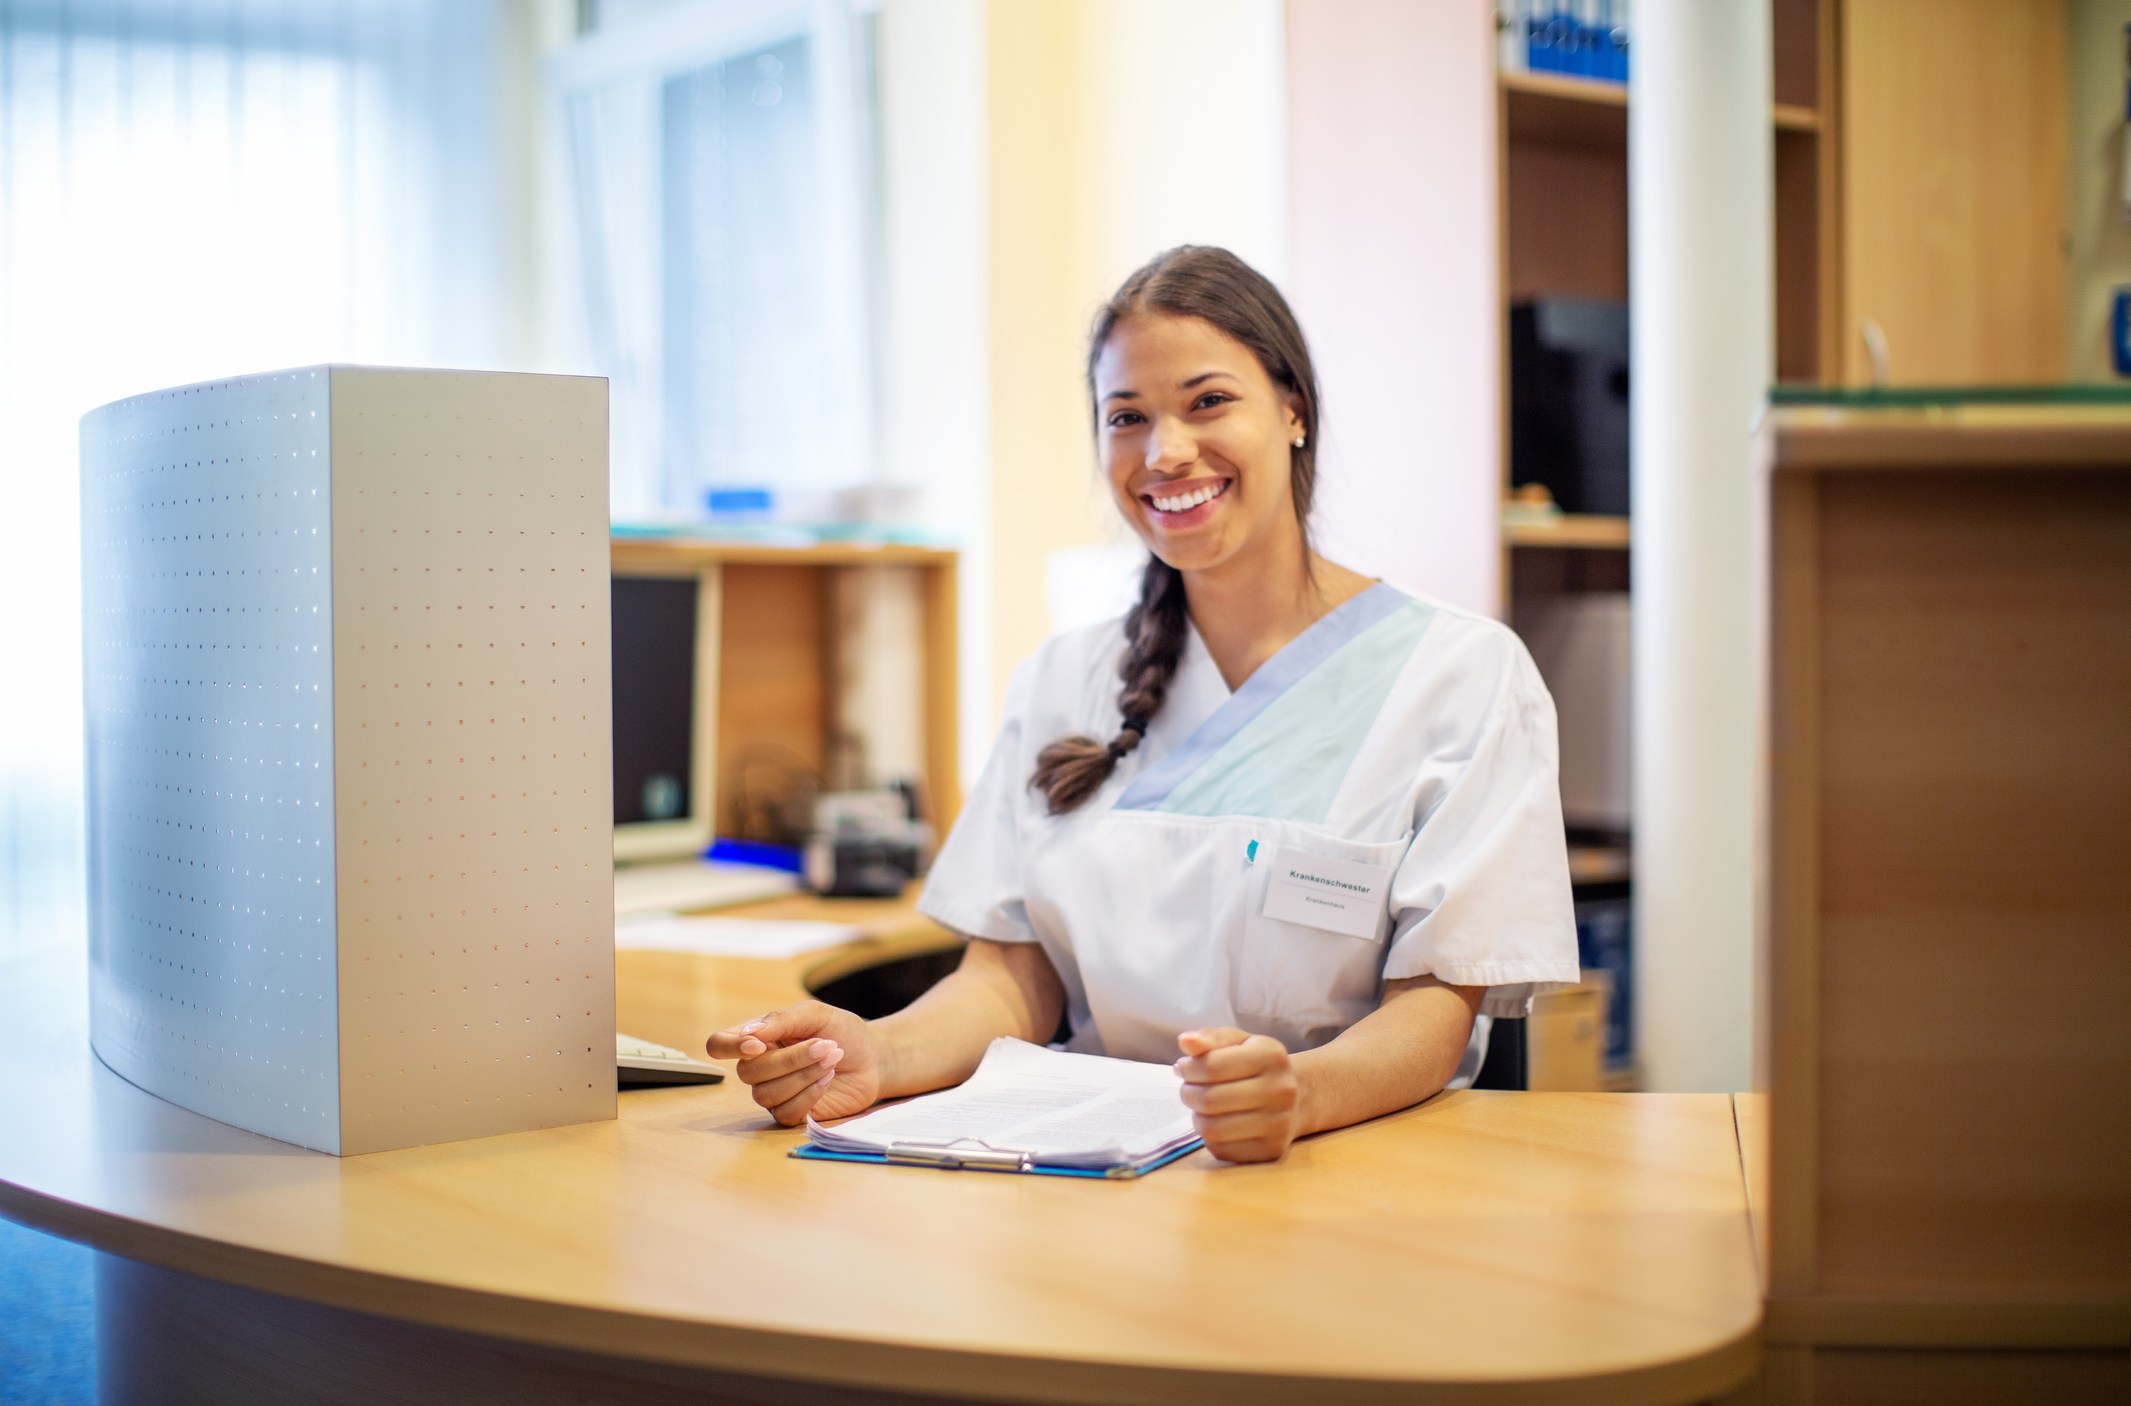 5 Things Medical Assistants Learn on the Job